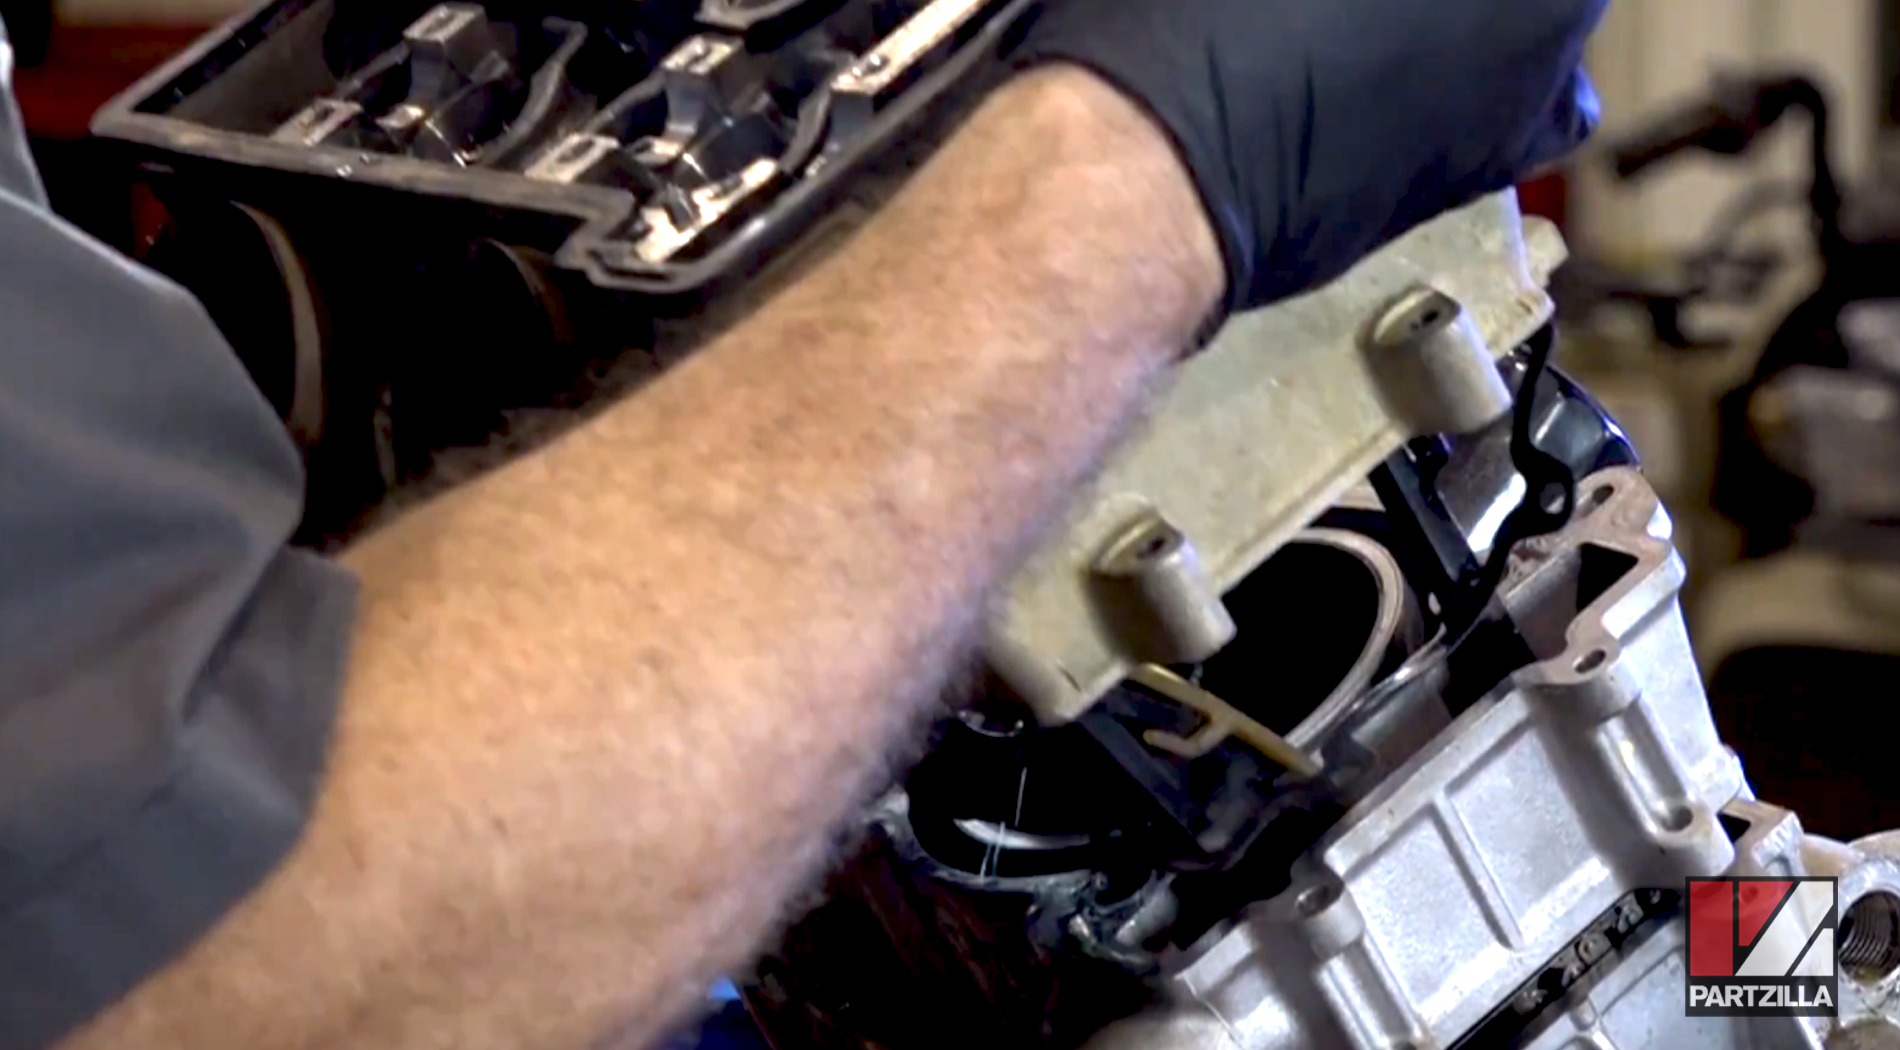 Polaris 900 side-by-side cylinder head removal